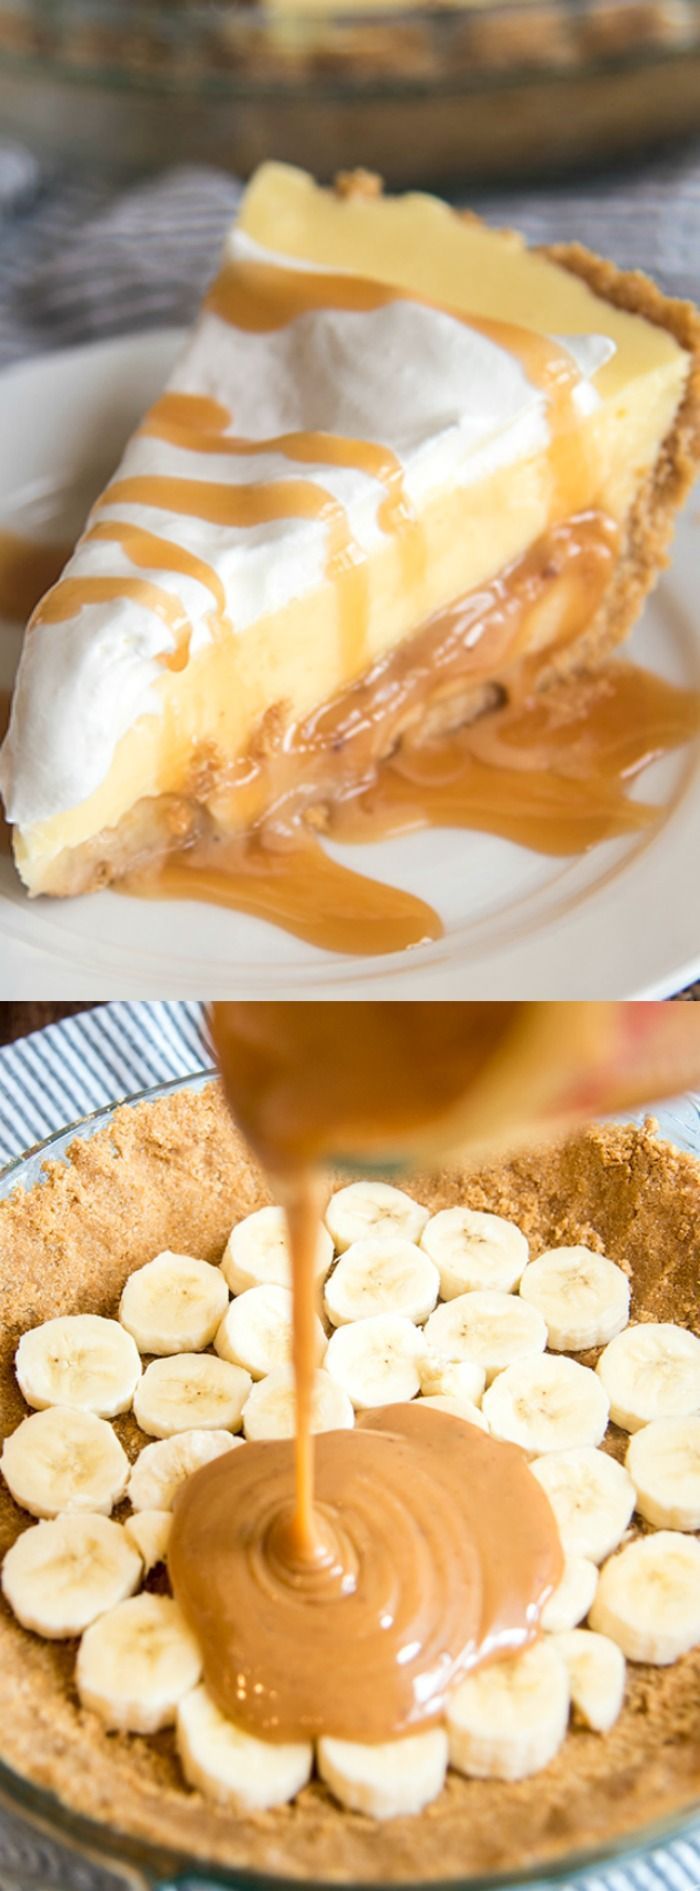 This Caramel Banana Cream Pie recipe from Aimee over at Like Mother Like Daughter